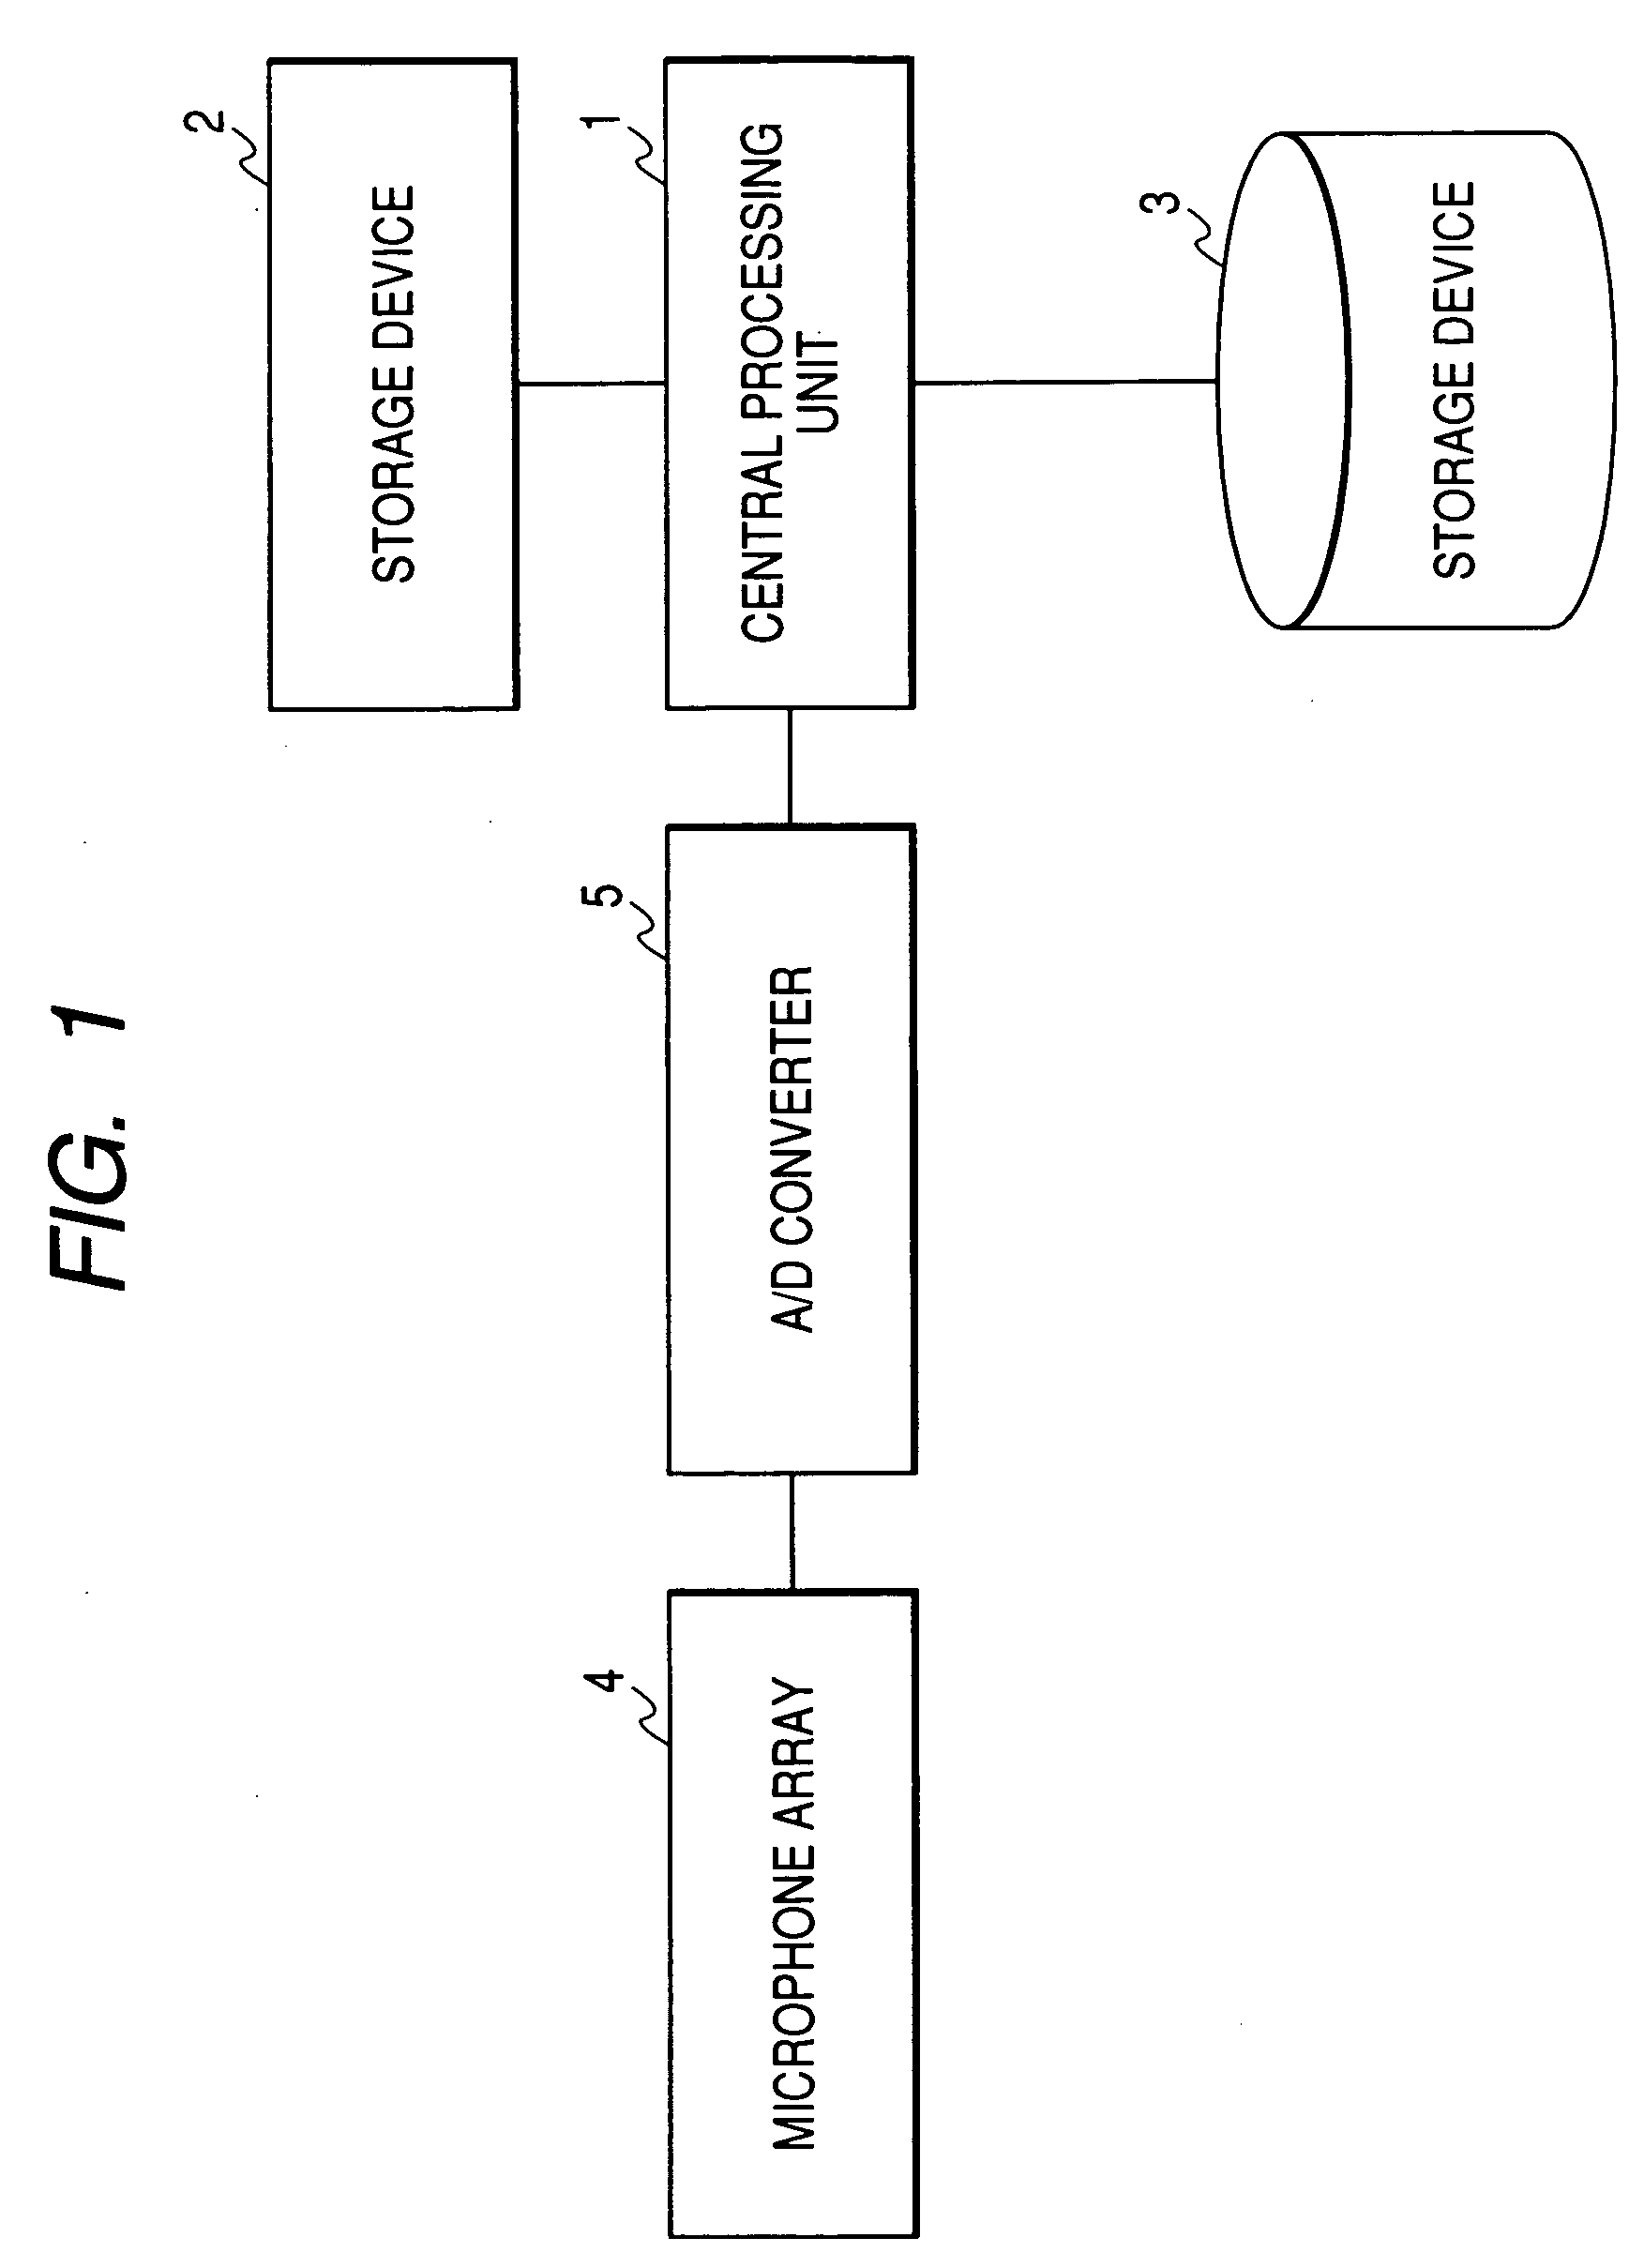 Sound source separating device, method, and program